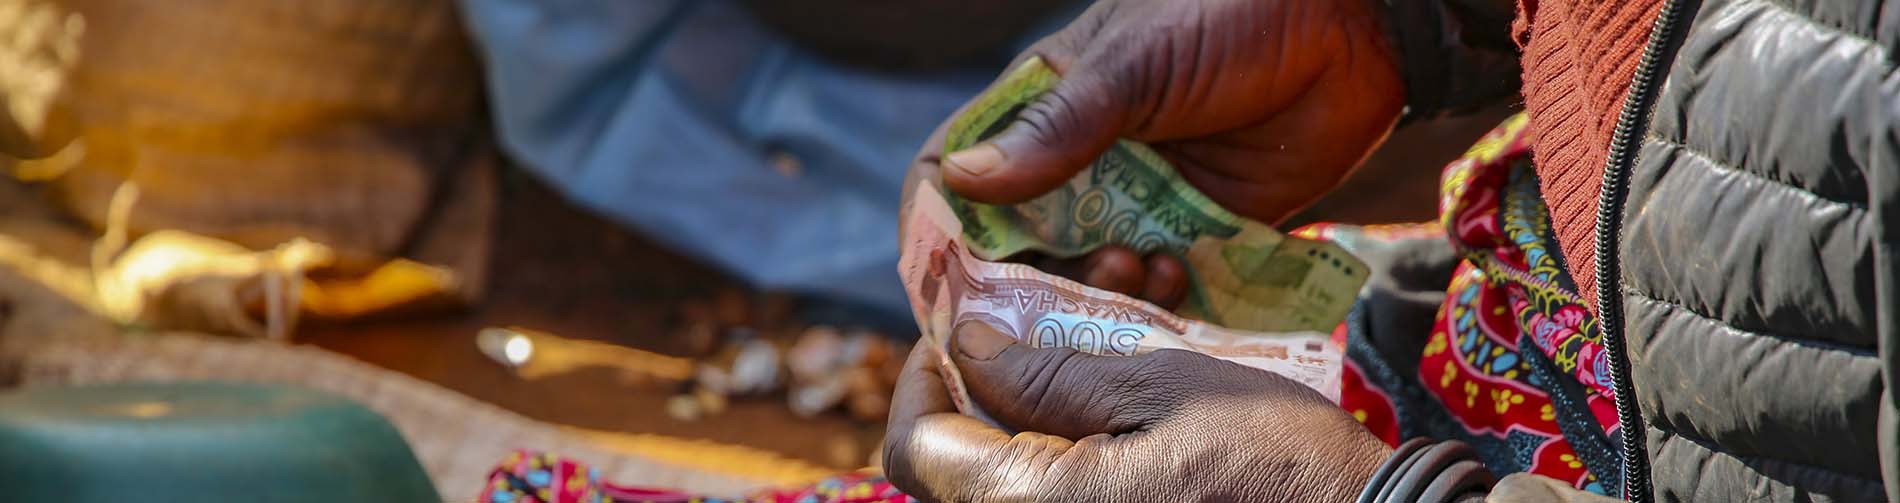 Cash transfers, relationship dynamics, and IPV among youth in Malawi